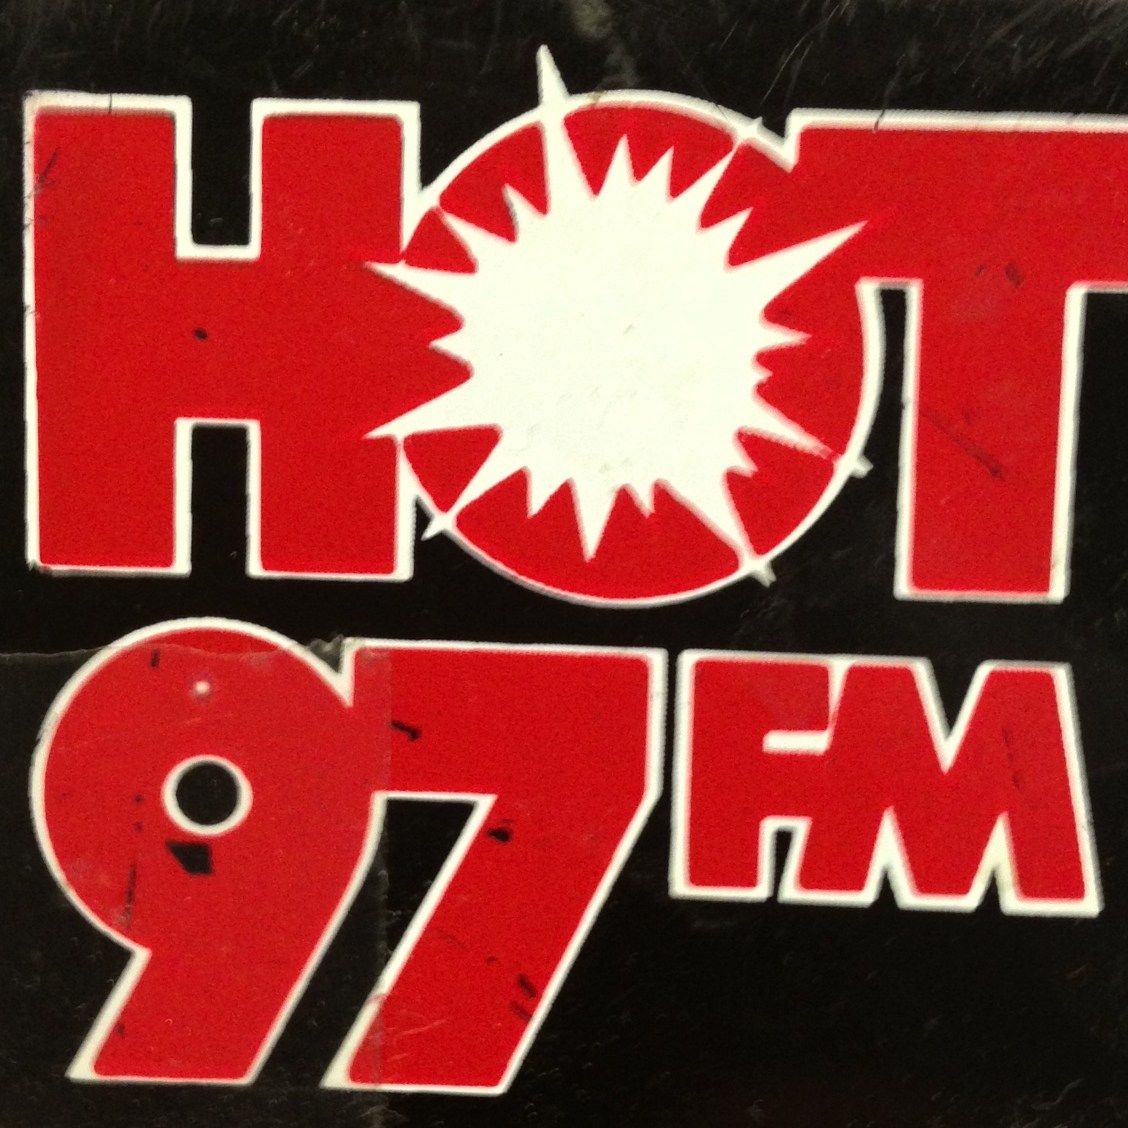 WQHT Aug 15, 1986 (Hot 103.5 very first day)